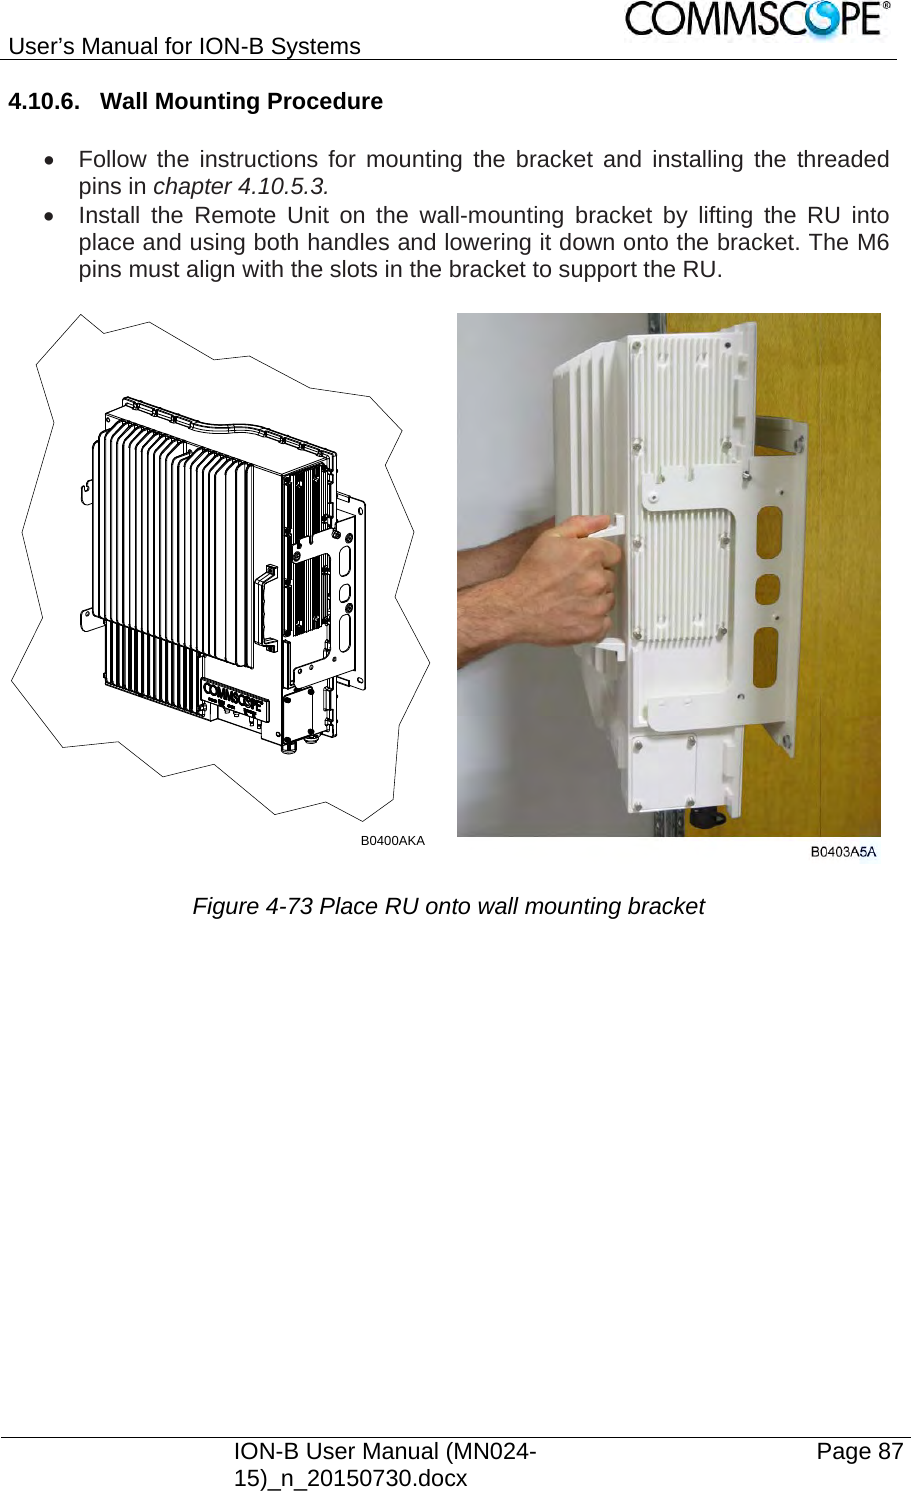 User’s Manual for ION-B Systems    ION-B User Manual (MN024-15)_n_20150730.docx  Page 87 4.10.6.  Wall Mounting Procedure    Follow the instructions for mounting the bracket and installing the threaded pins in chapter 4.10.5.3.   Install the Remote Unit on the wall-mounting bracket by lifting the RU into place and using both handles and lowering it down onto the bracket. The M6 pins must align with the slots in the bracket to support the RU. Figure 4-73 Place RU onto wall mounting bracket   B0400AKA